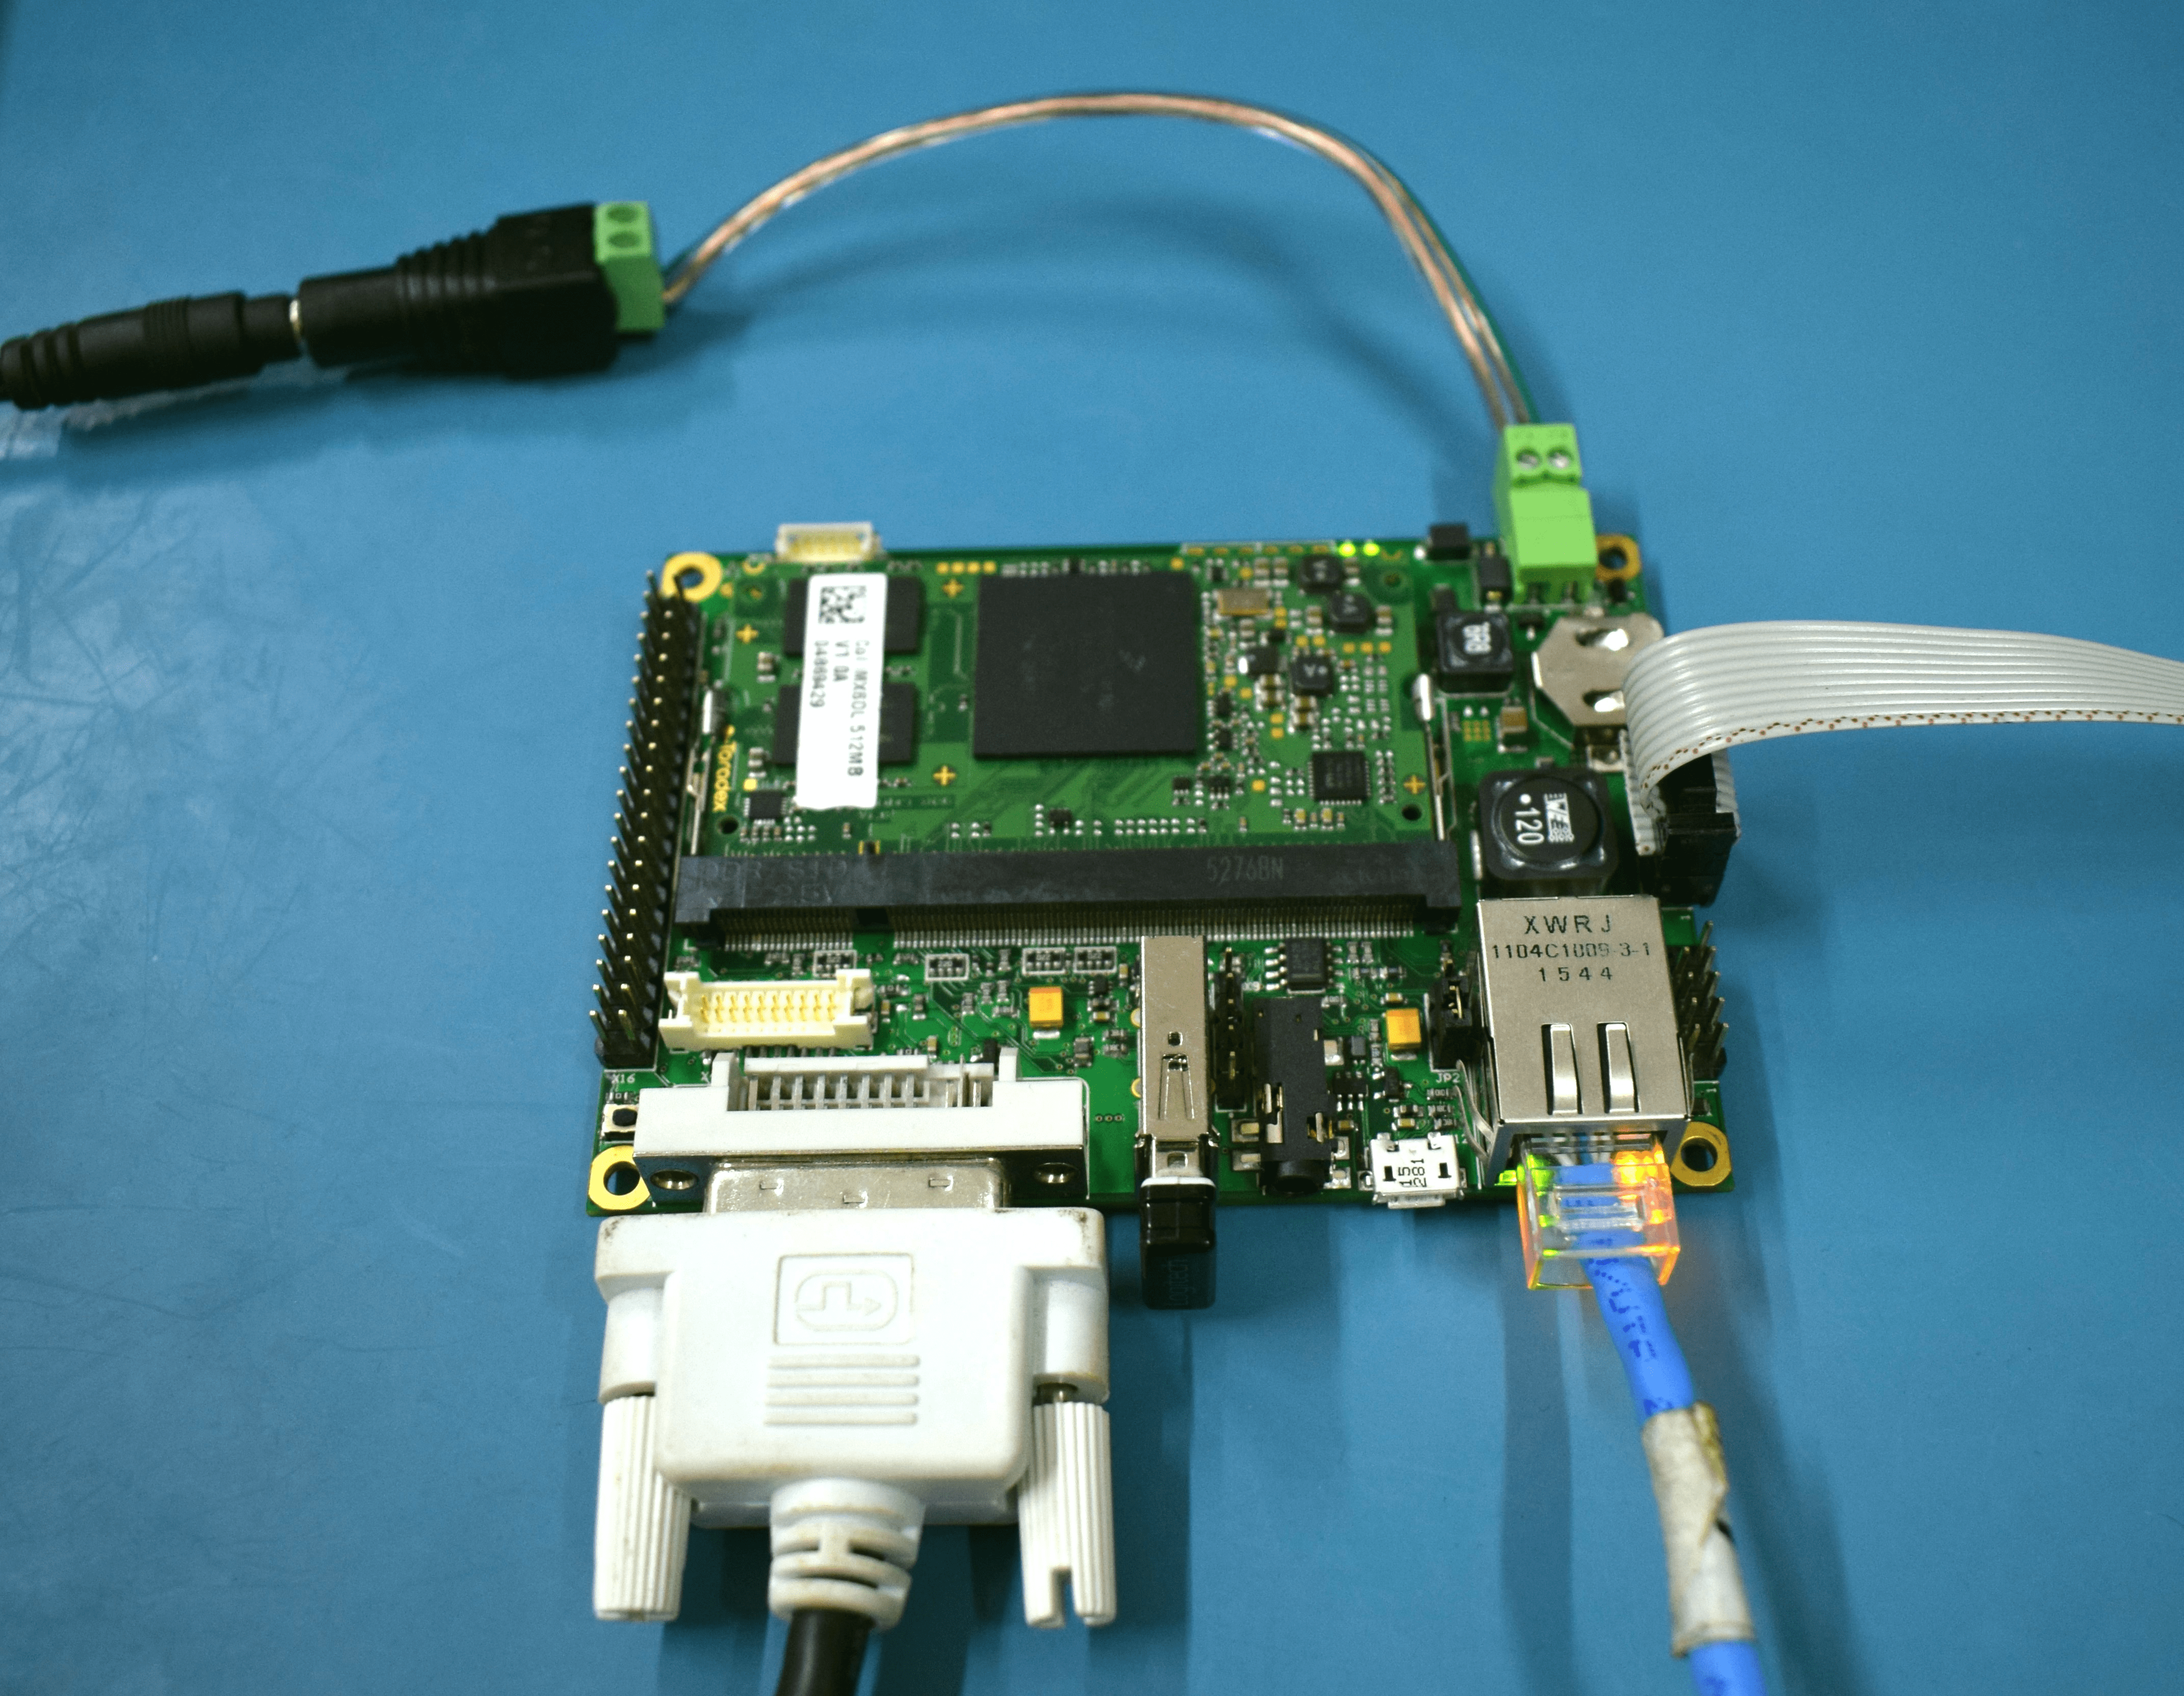 DVI to VGA adapter, Ethernet, USB keyboard and Power supply connected to the Iris Carrier Board